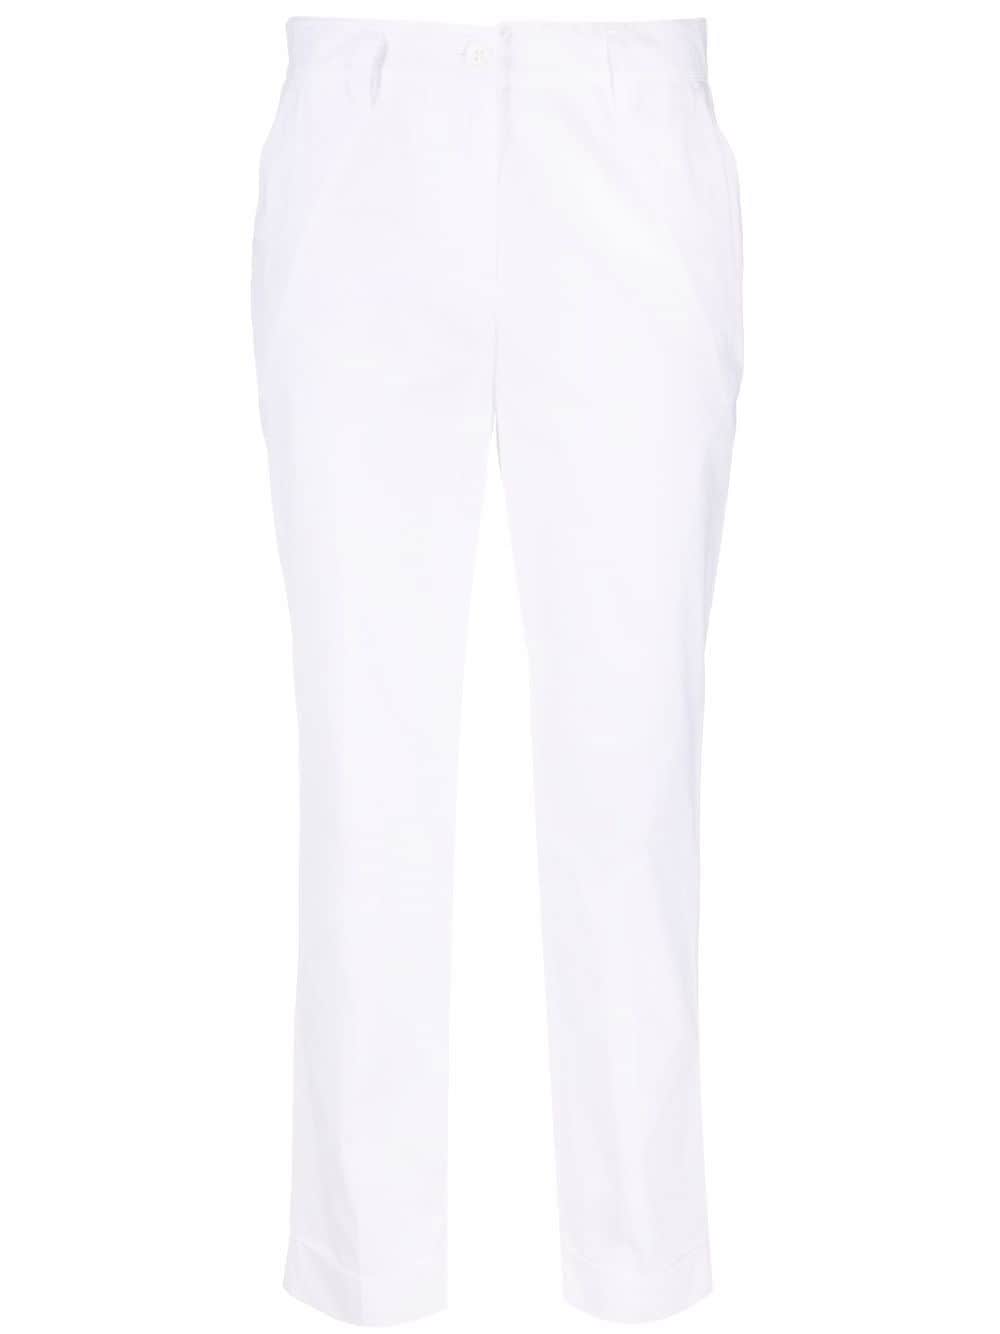 P.A.R.O.S.H. tapered cotton trousers - White von P.A.R.O.S.H.